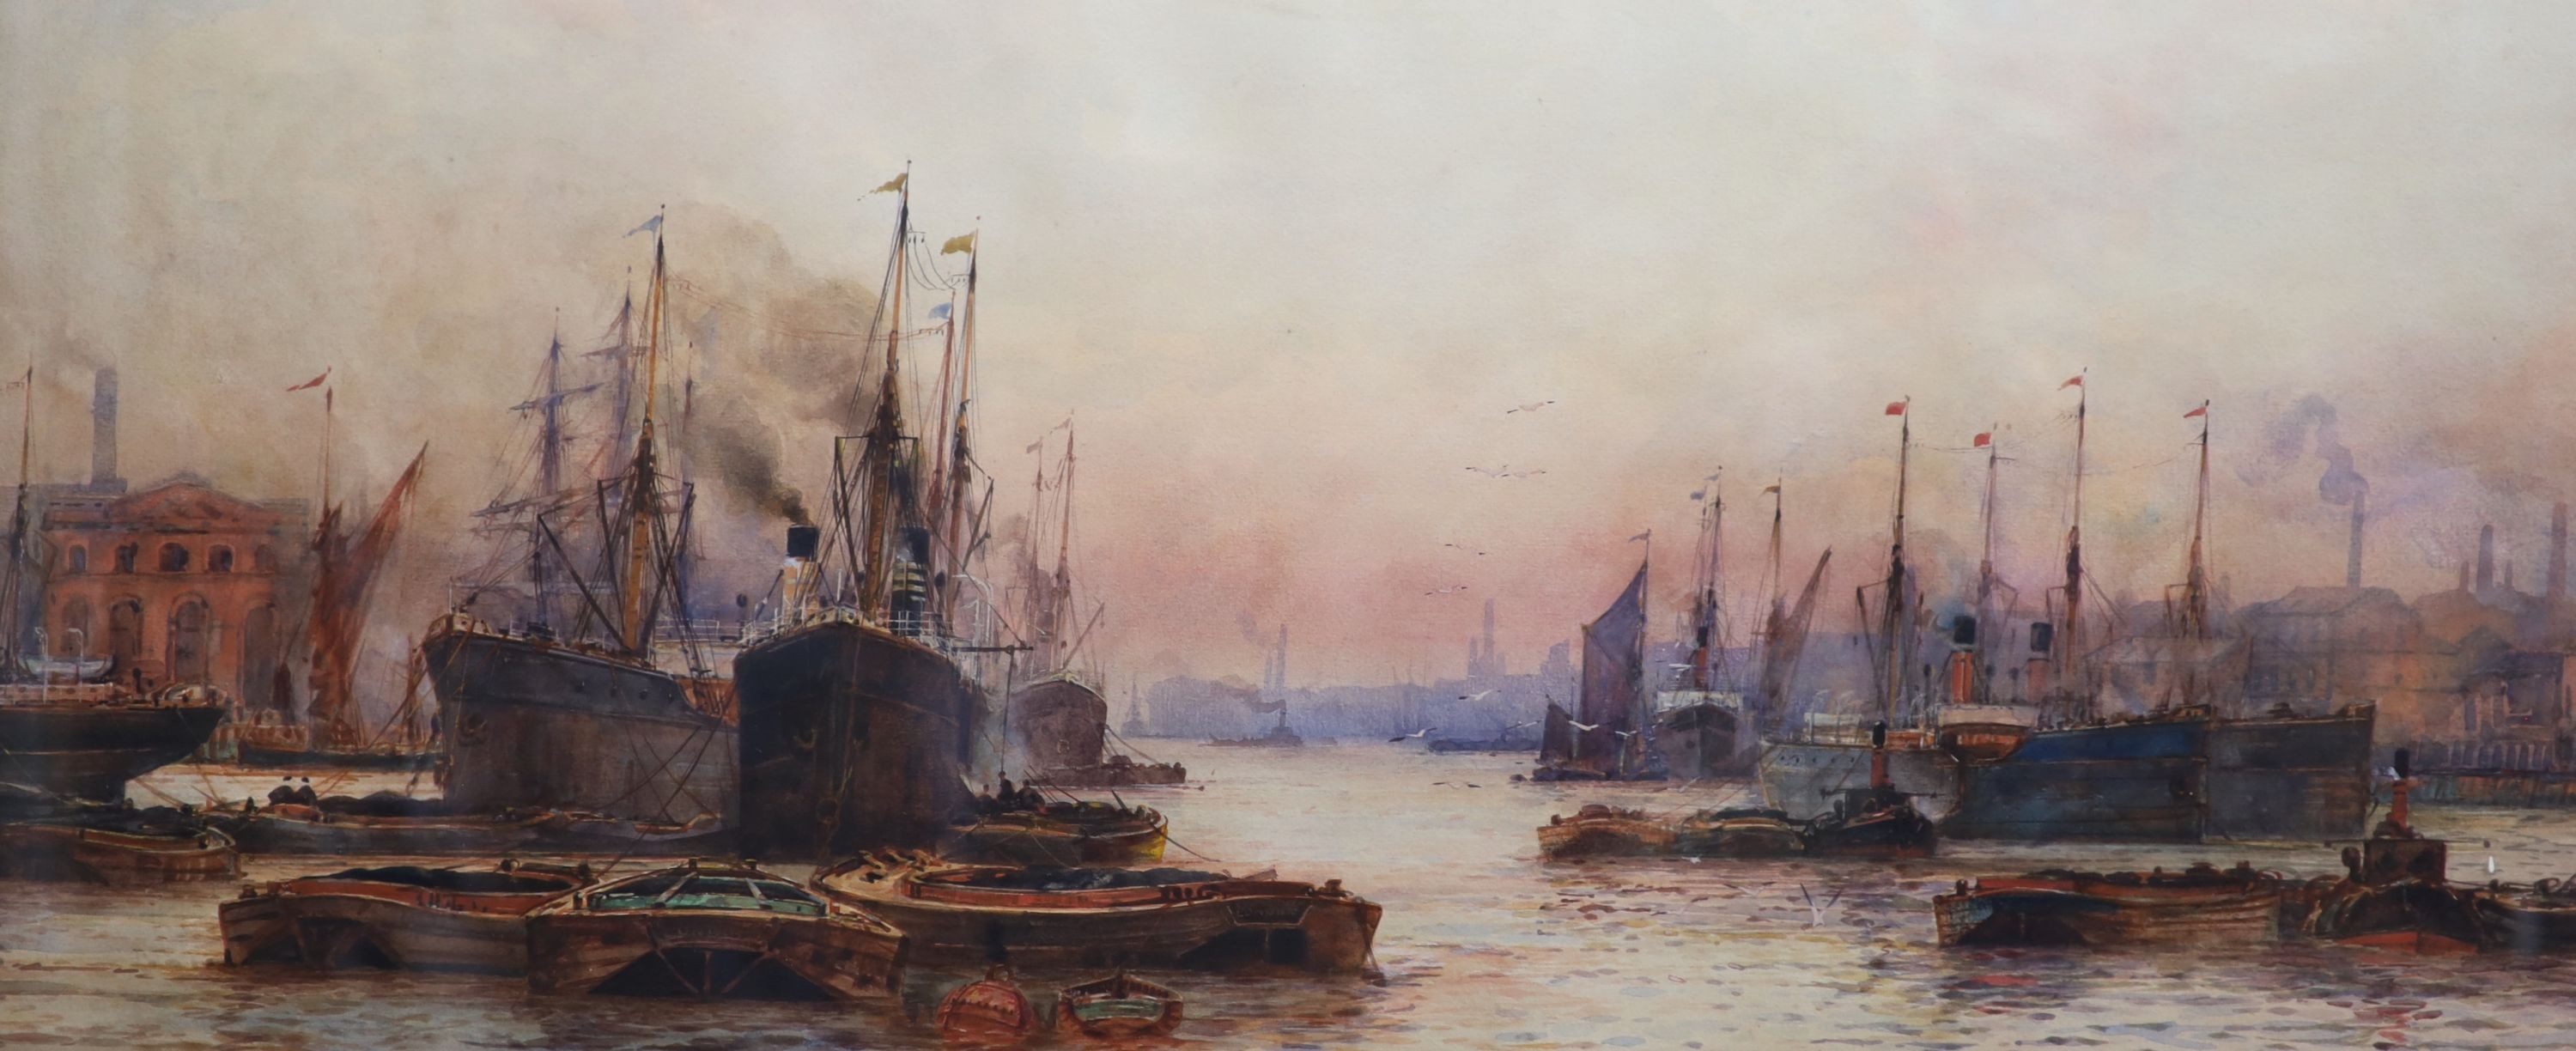 Frederick William Scarborough (1860-1939), ‘Sunset, Wapping Reach, London’, watercolour, 33 x 74cm.                                                                                                                         